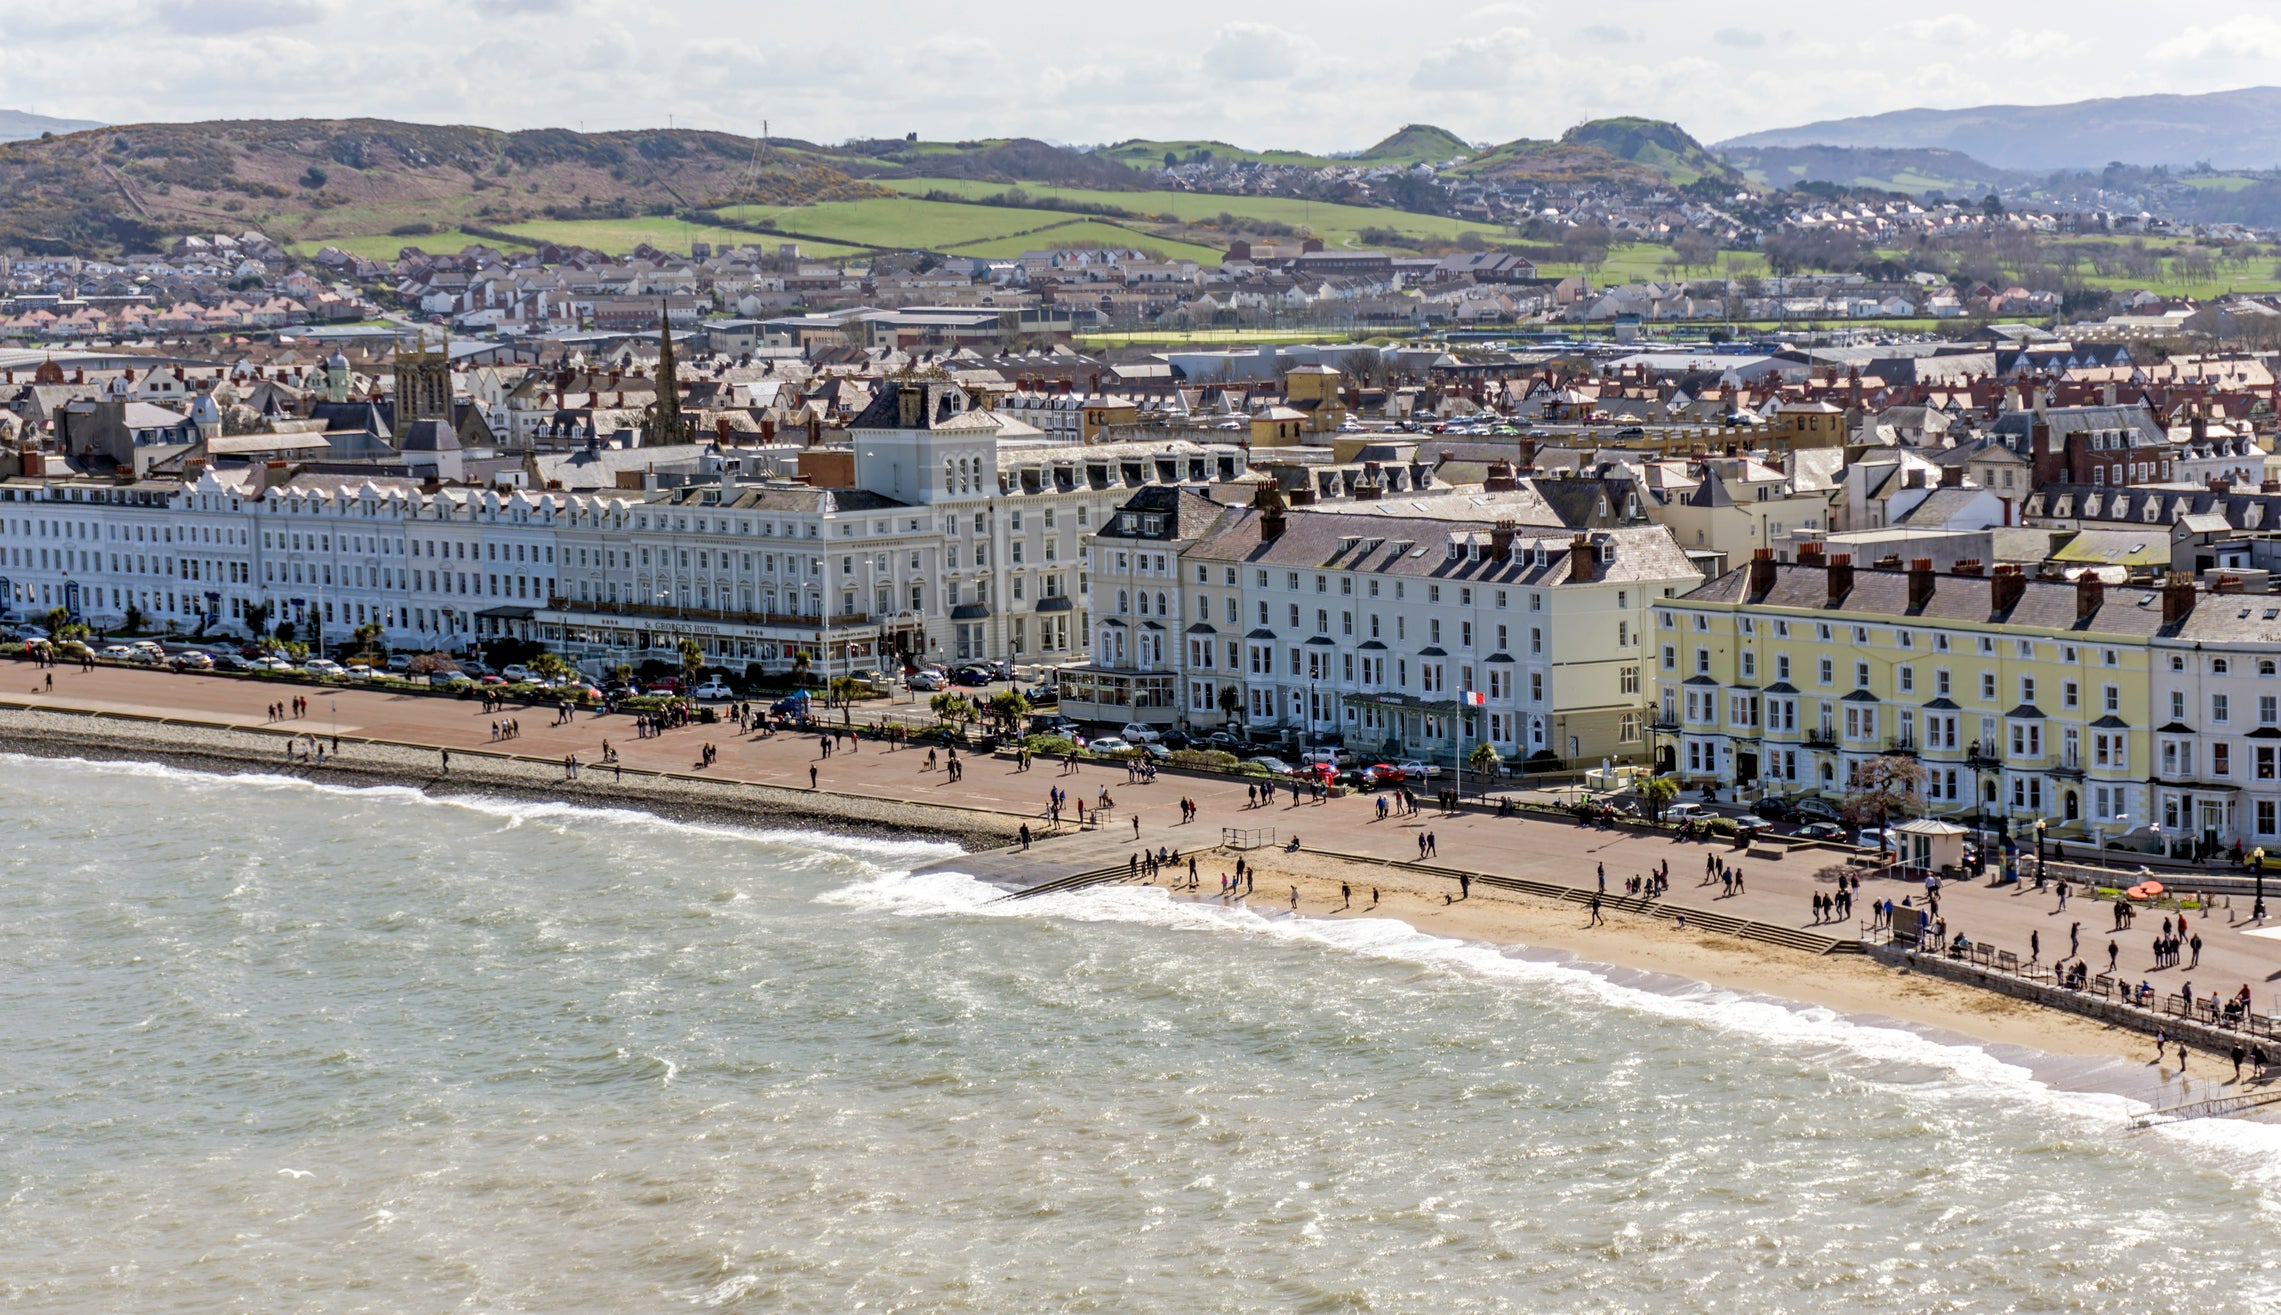 Llandudno Promenade in North Wales, where travellers of old would stroll (iStock)